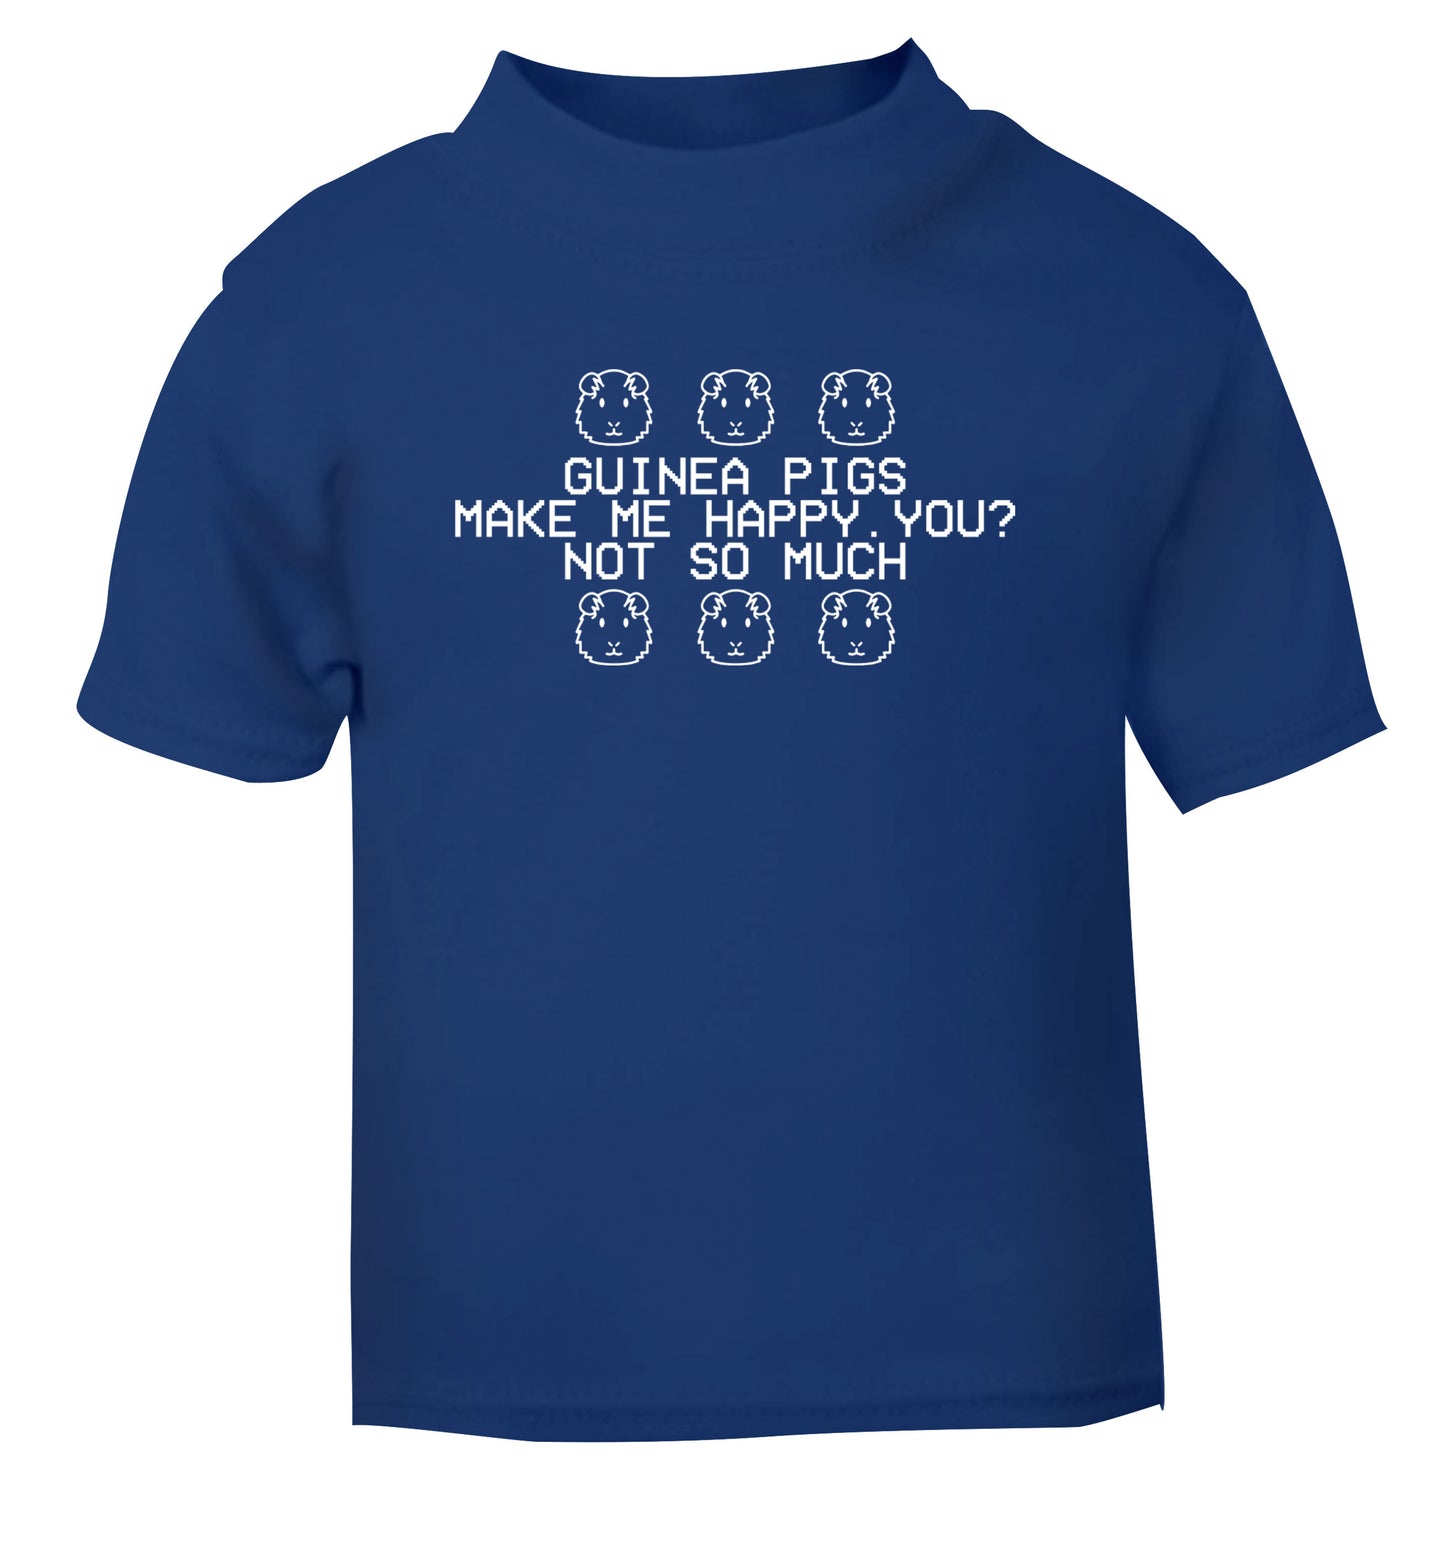 Guinea pigs make me happy, you not so much blue Baby Toddler Tshirt 2 Years